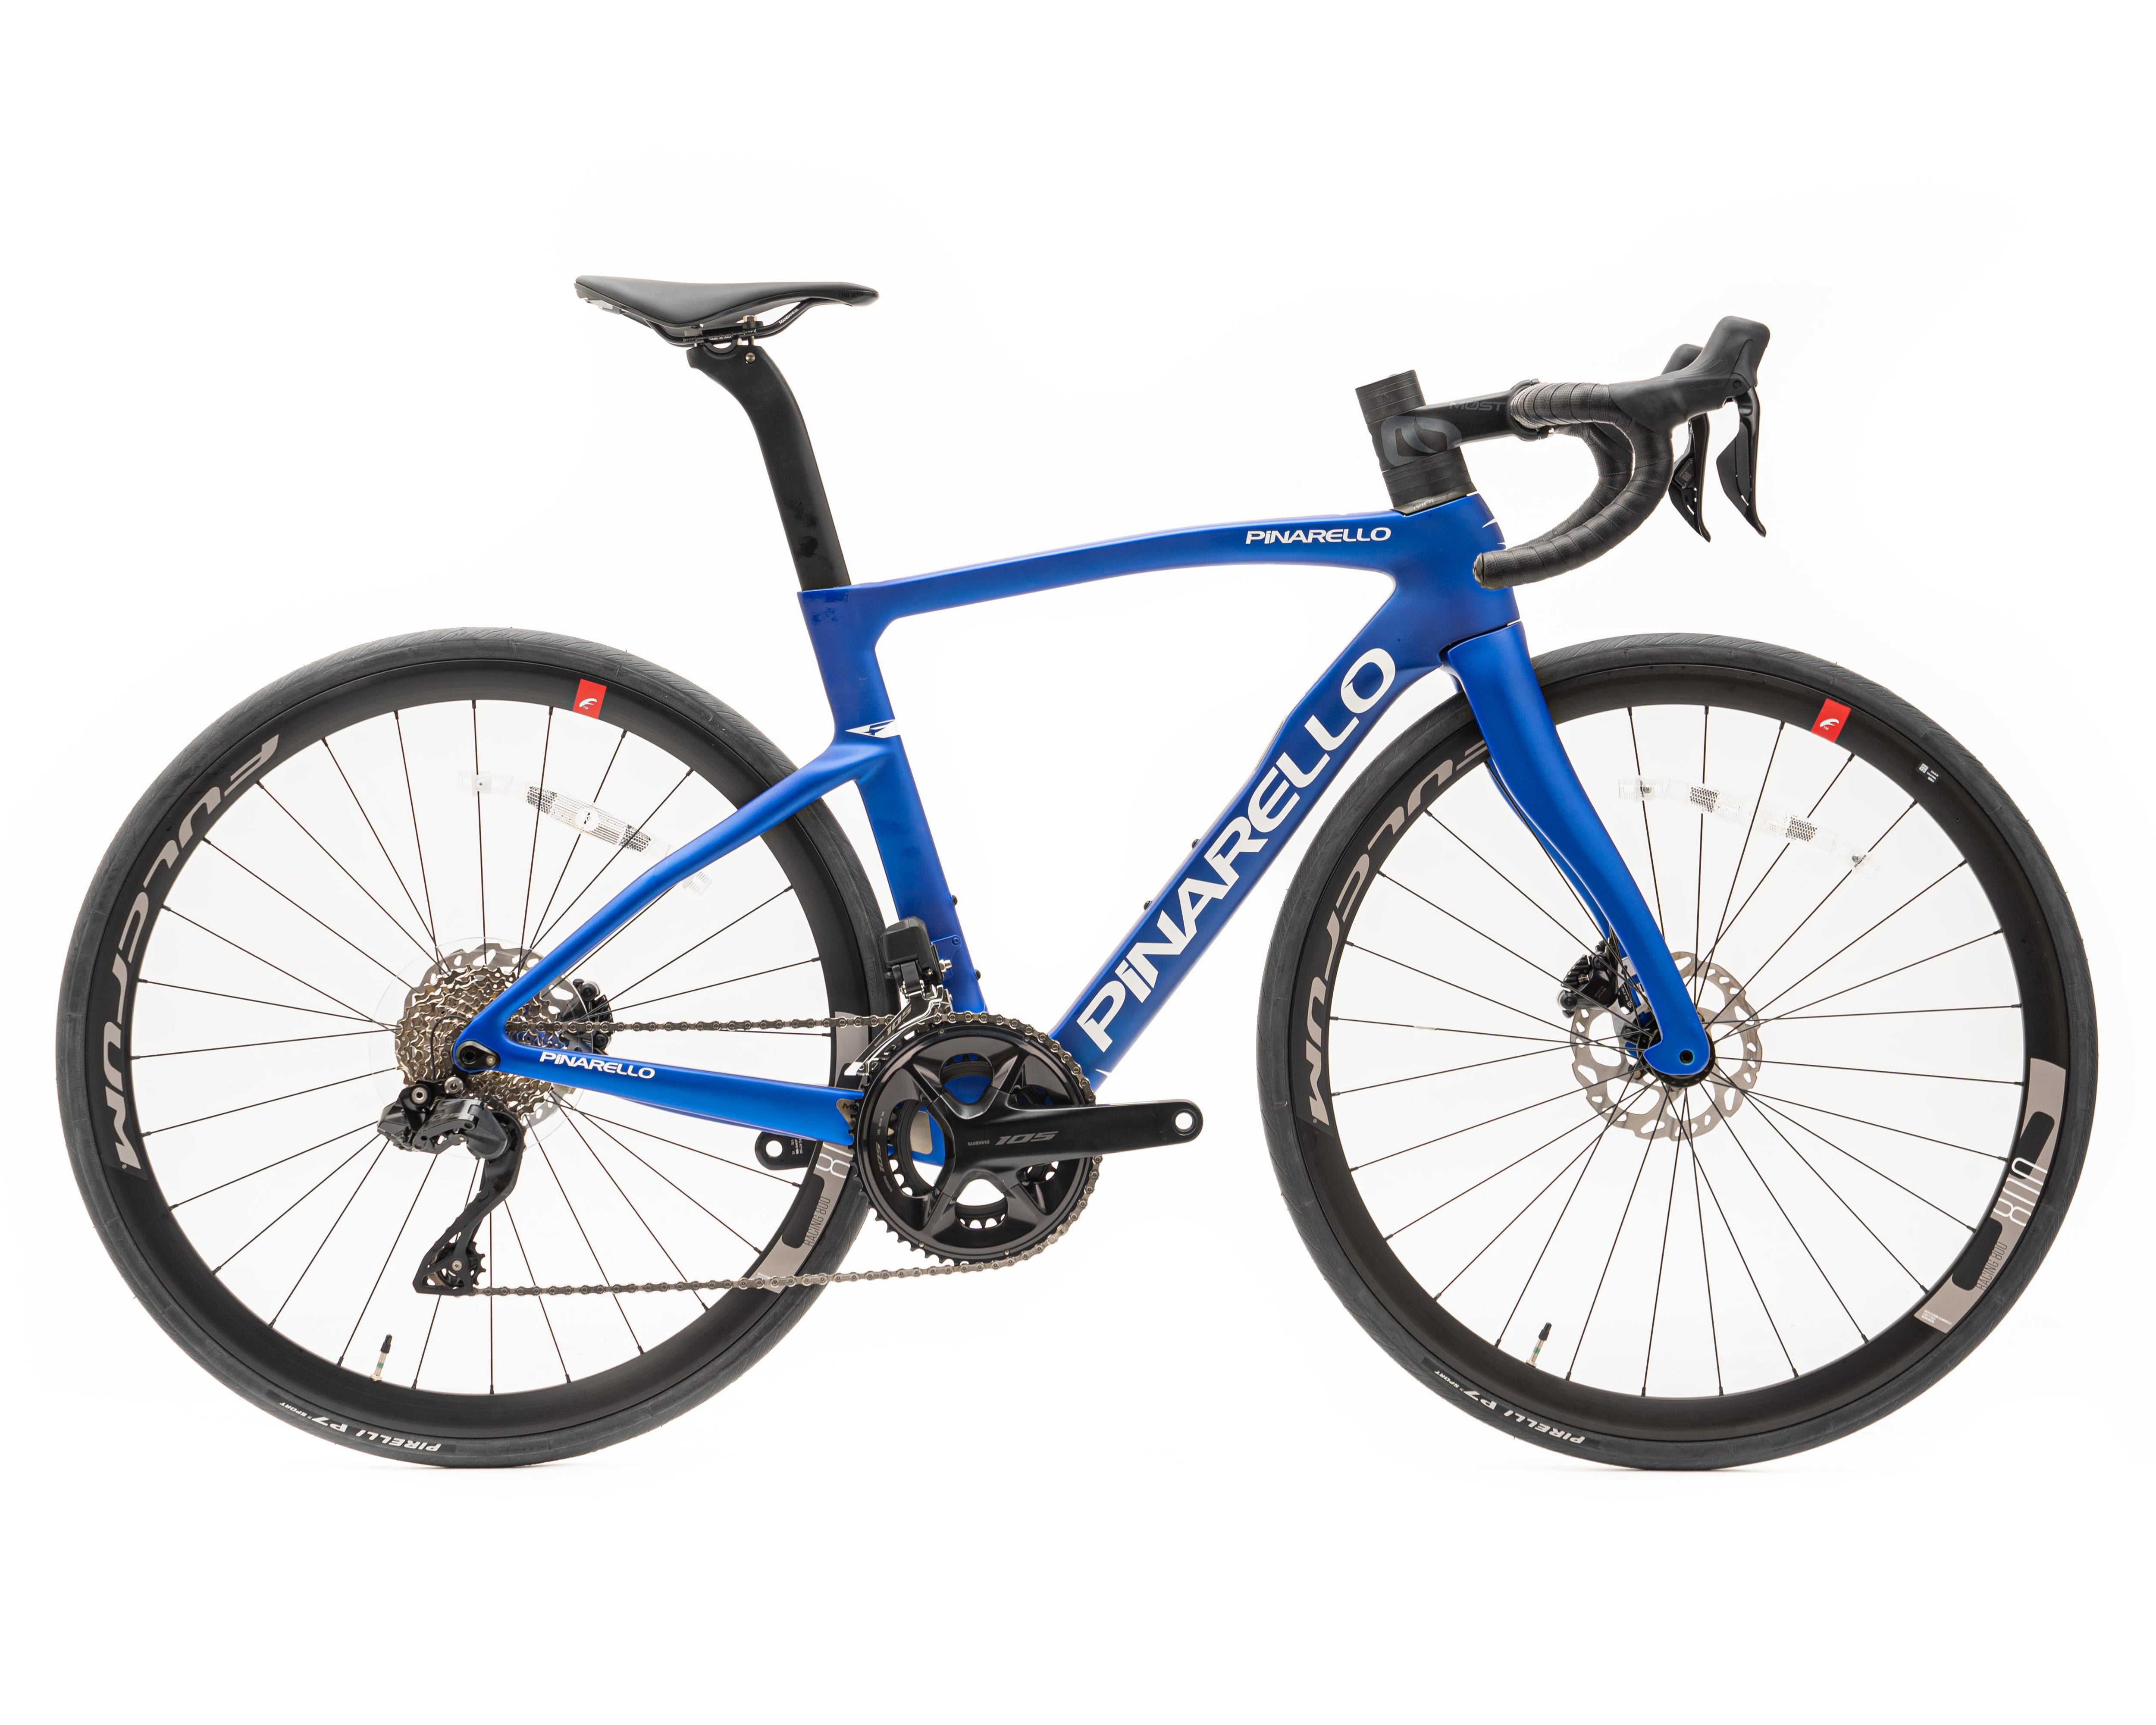 New And Discounted Pinarello Bikes/Frames – Incycle Bicycles